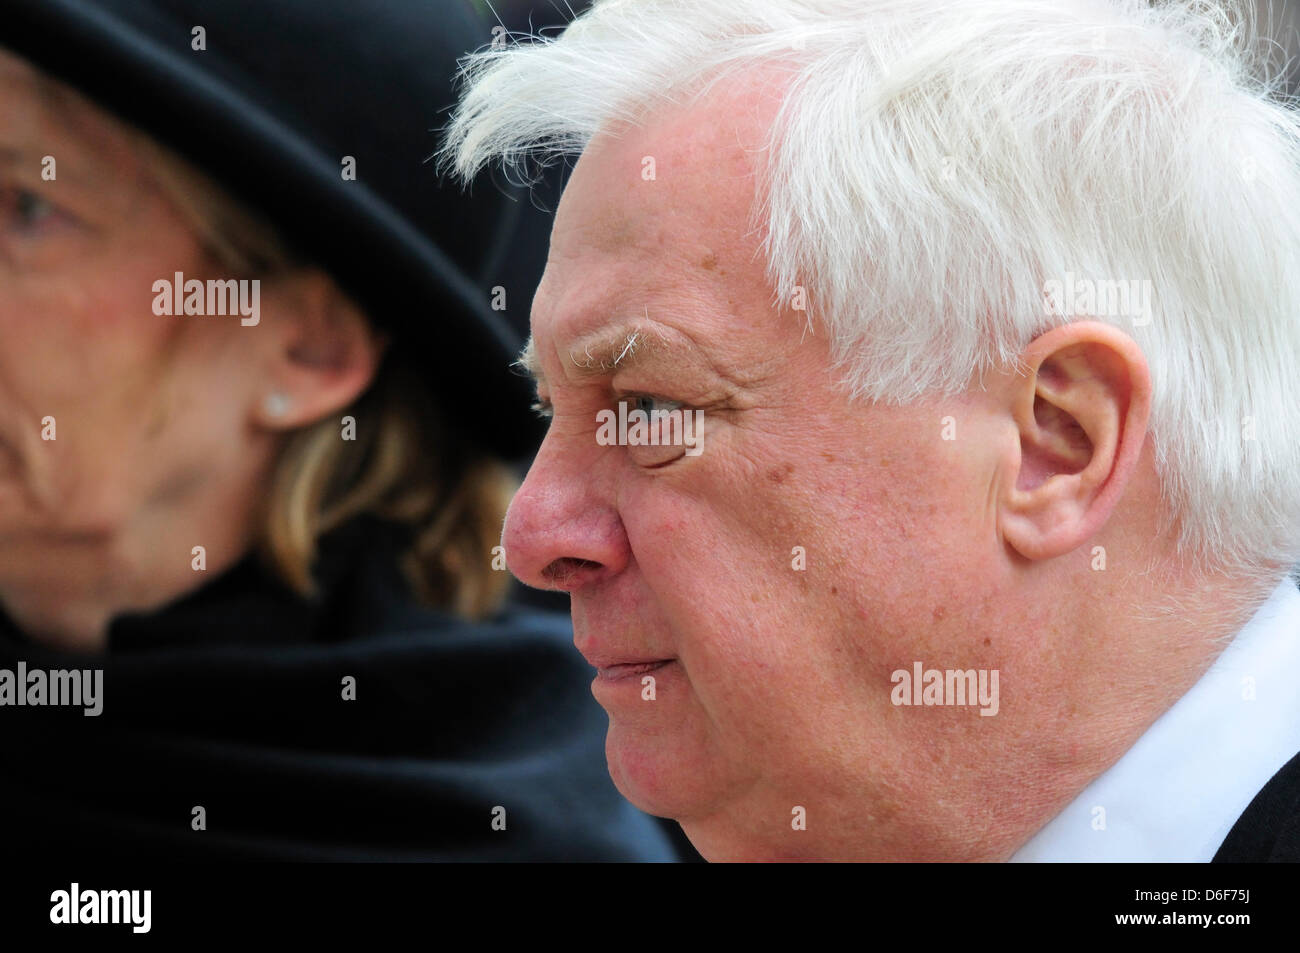 London, UK. 17th April, 2013. Lord Chris Patten at Margaret Thatcher's funeral at St Paul's Cathedral. Stock Photo